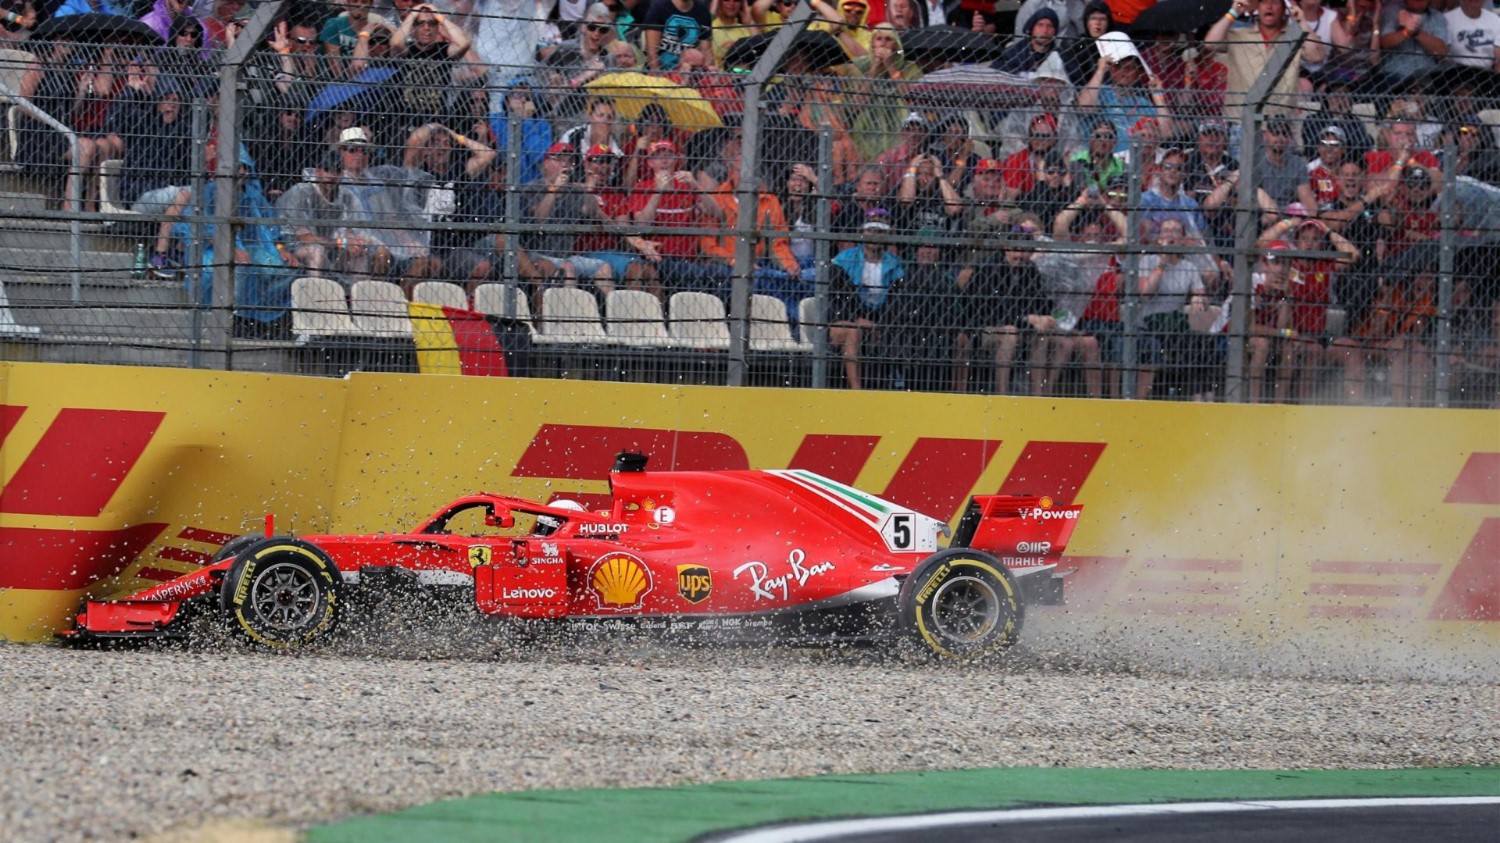 Vettel crashing out of the lead in last years race (slick tires on wet track) was the start of his downfall